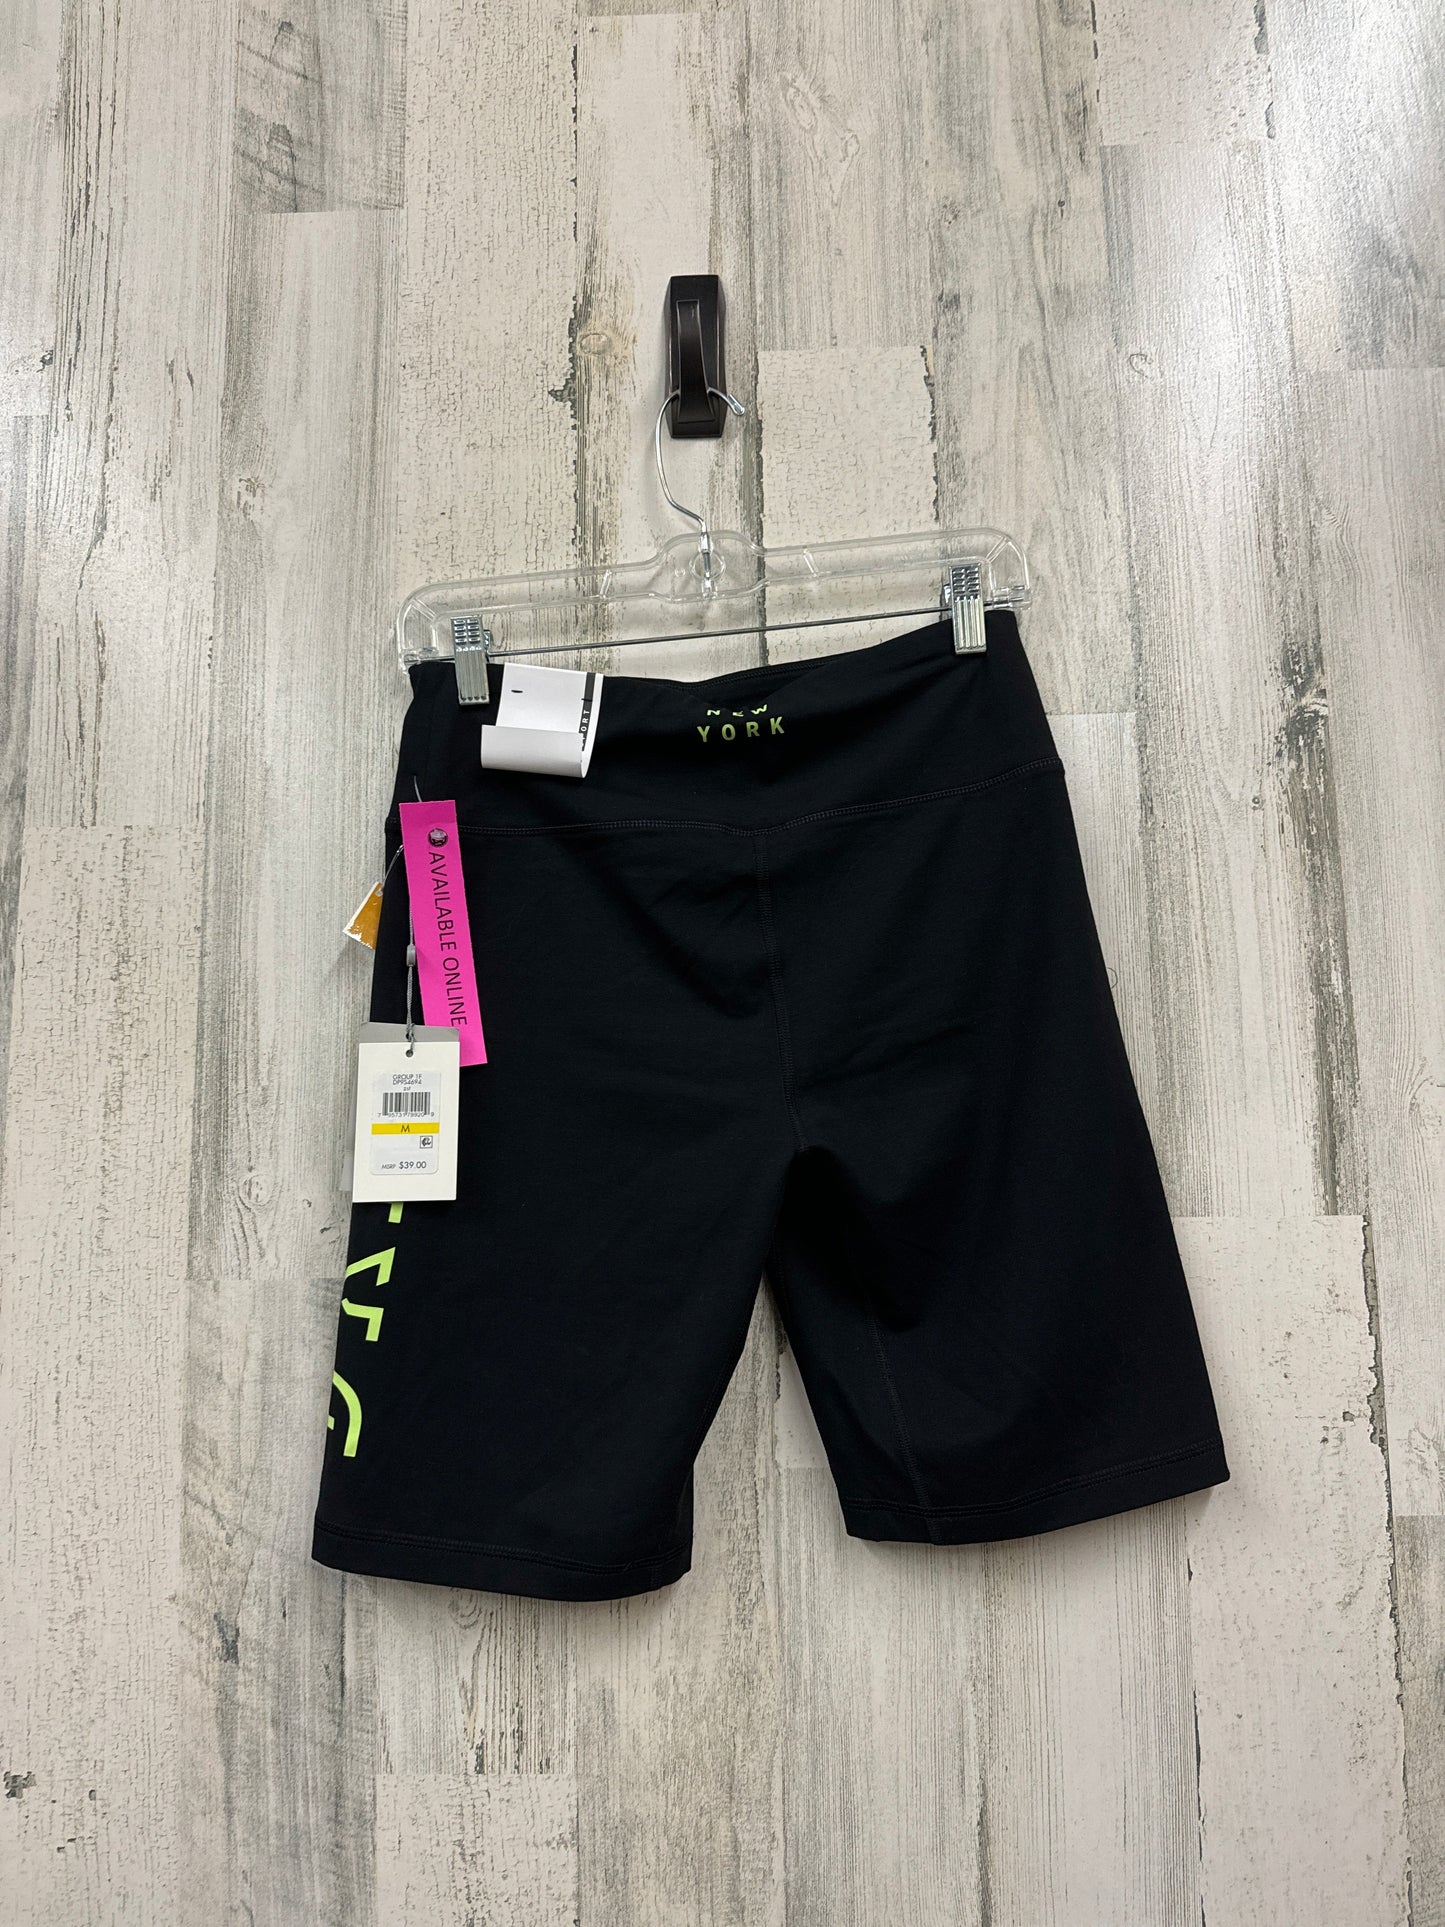 Athletic Shorts By Dkny  Size: M